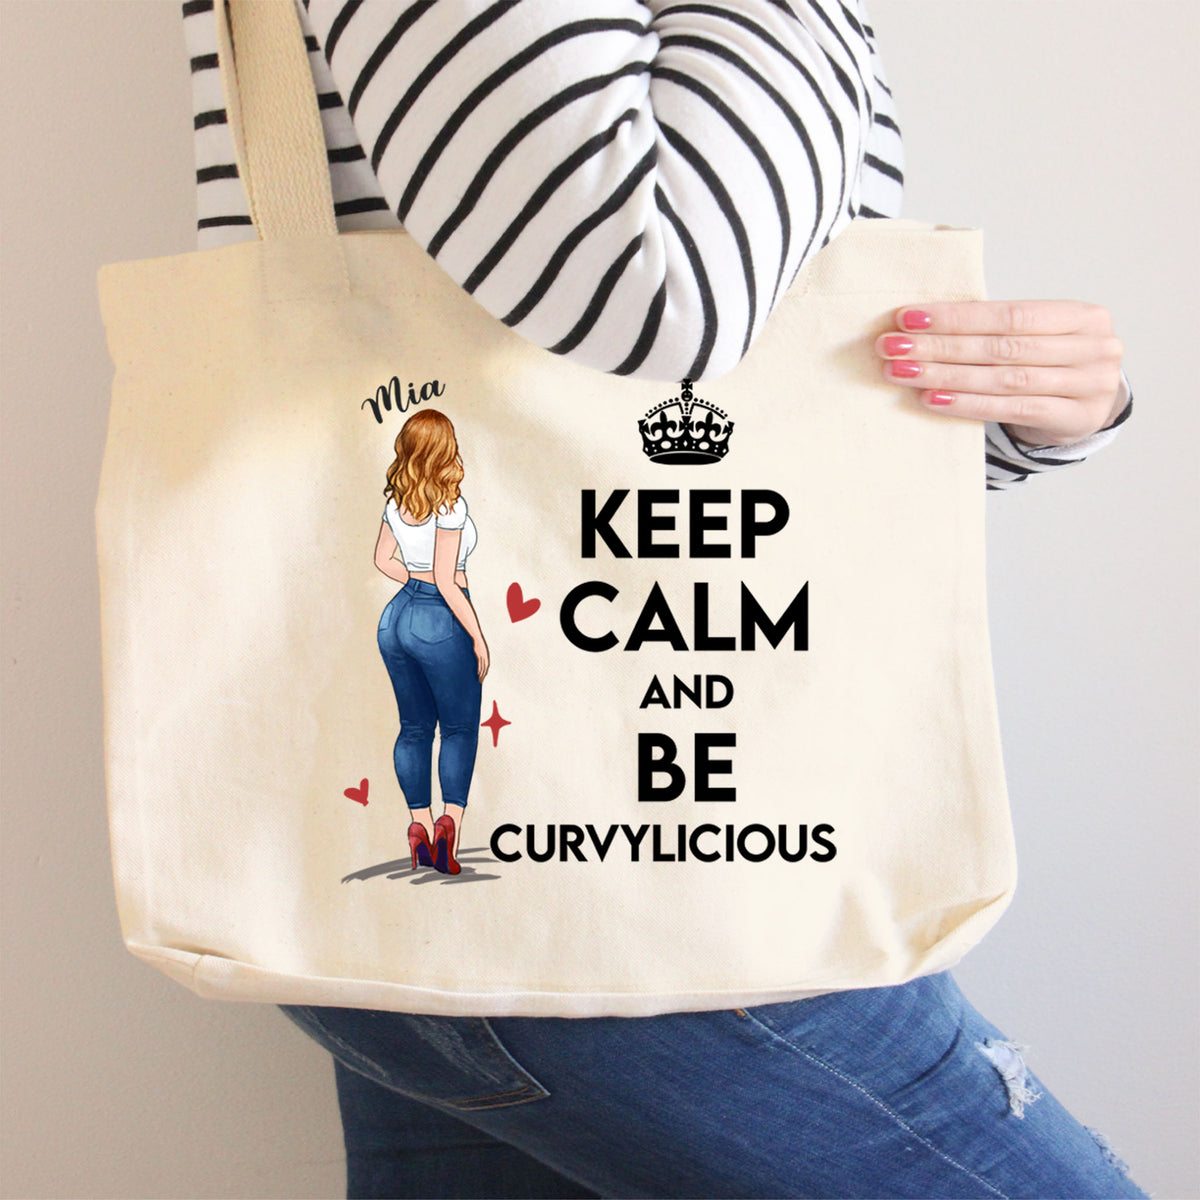 Personalized rounded canvas tote bag gift ideas for curvy girls